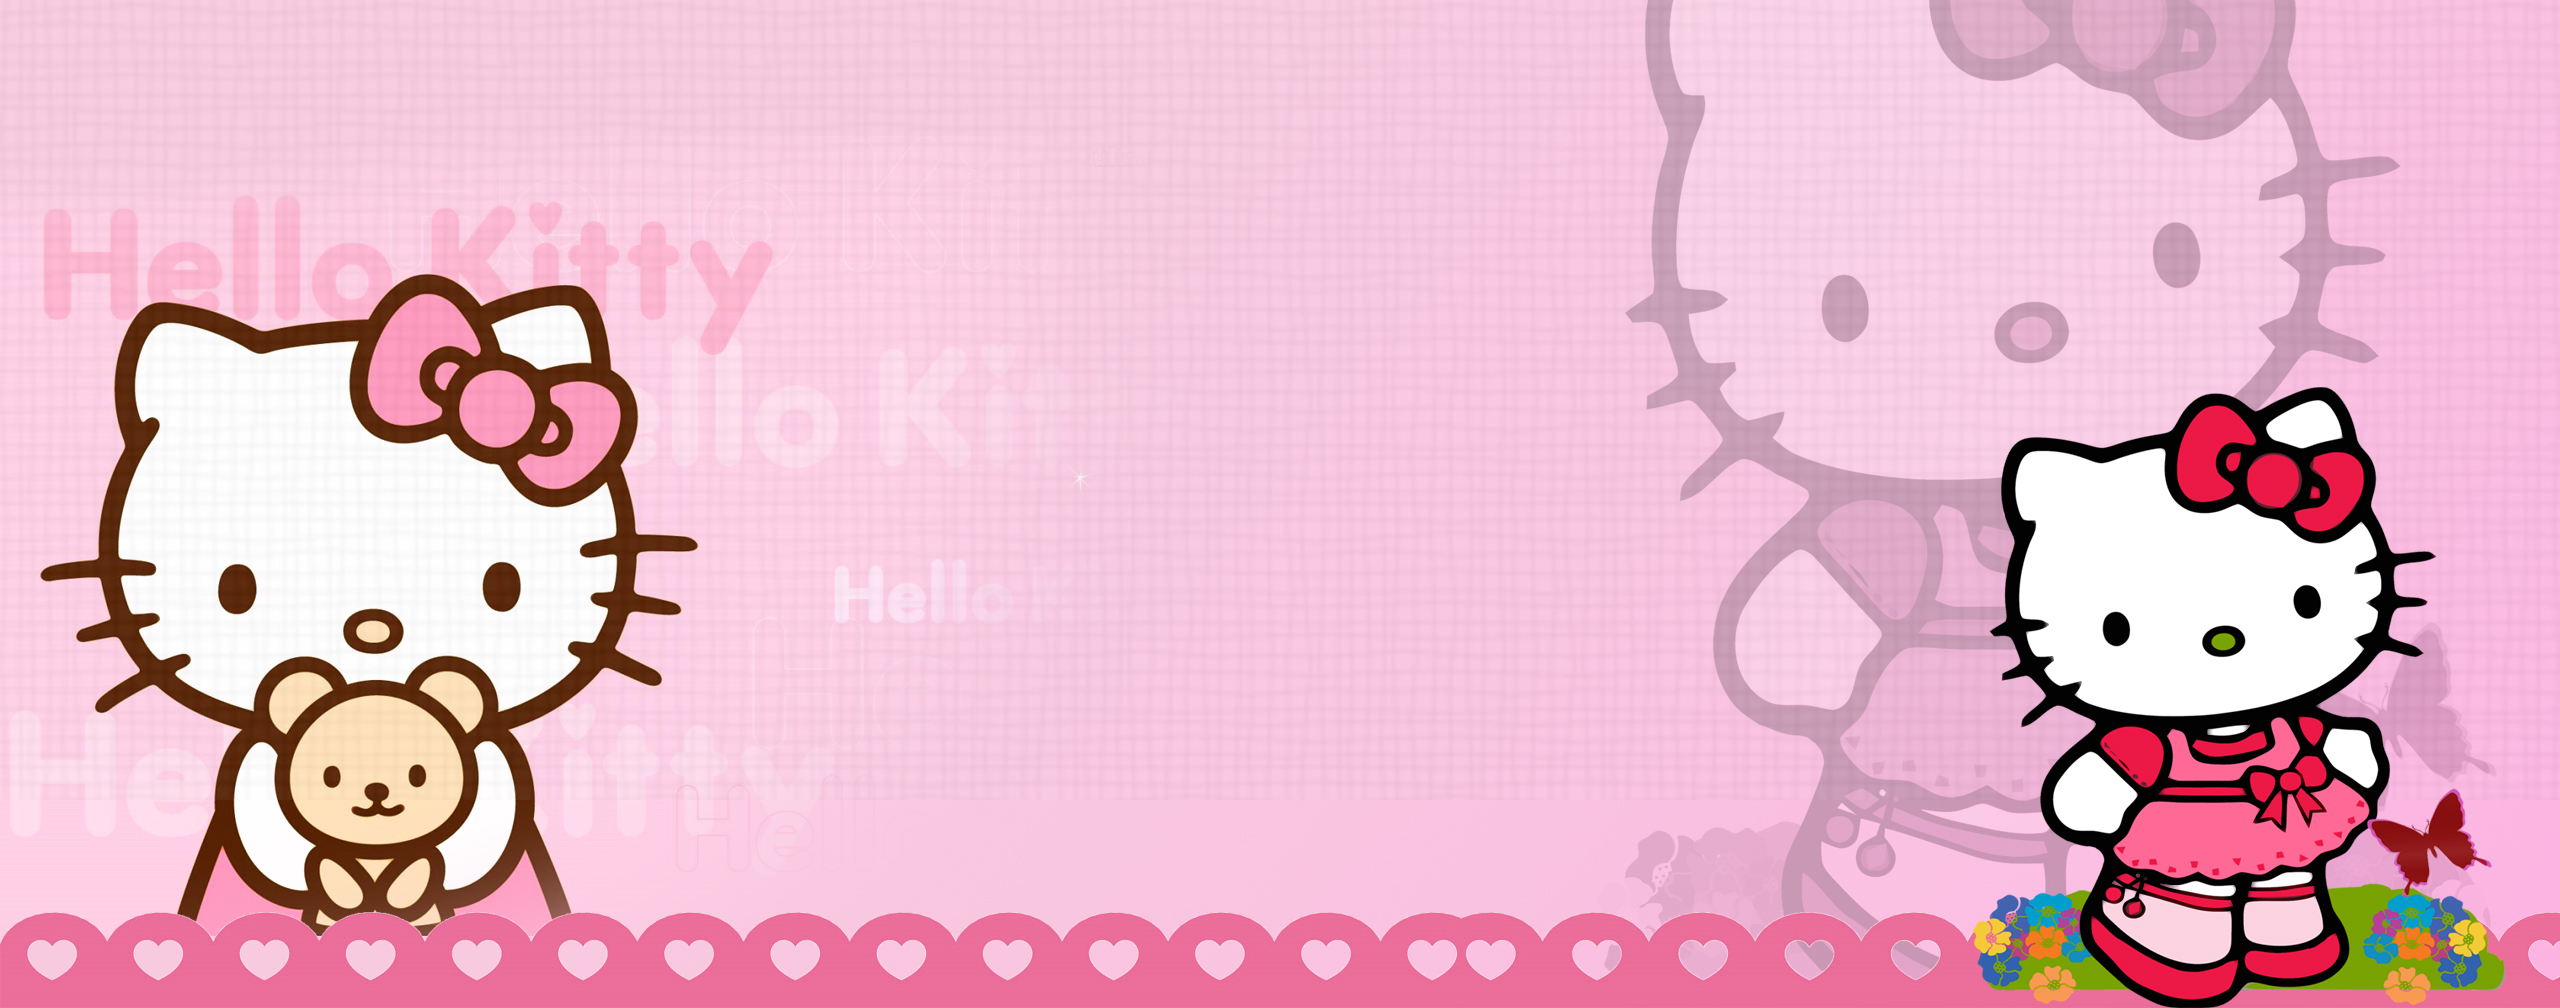 Hello Kitty Wallpaper For Full HD Pictures